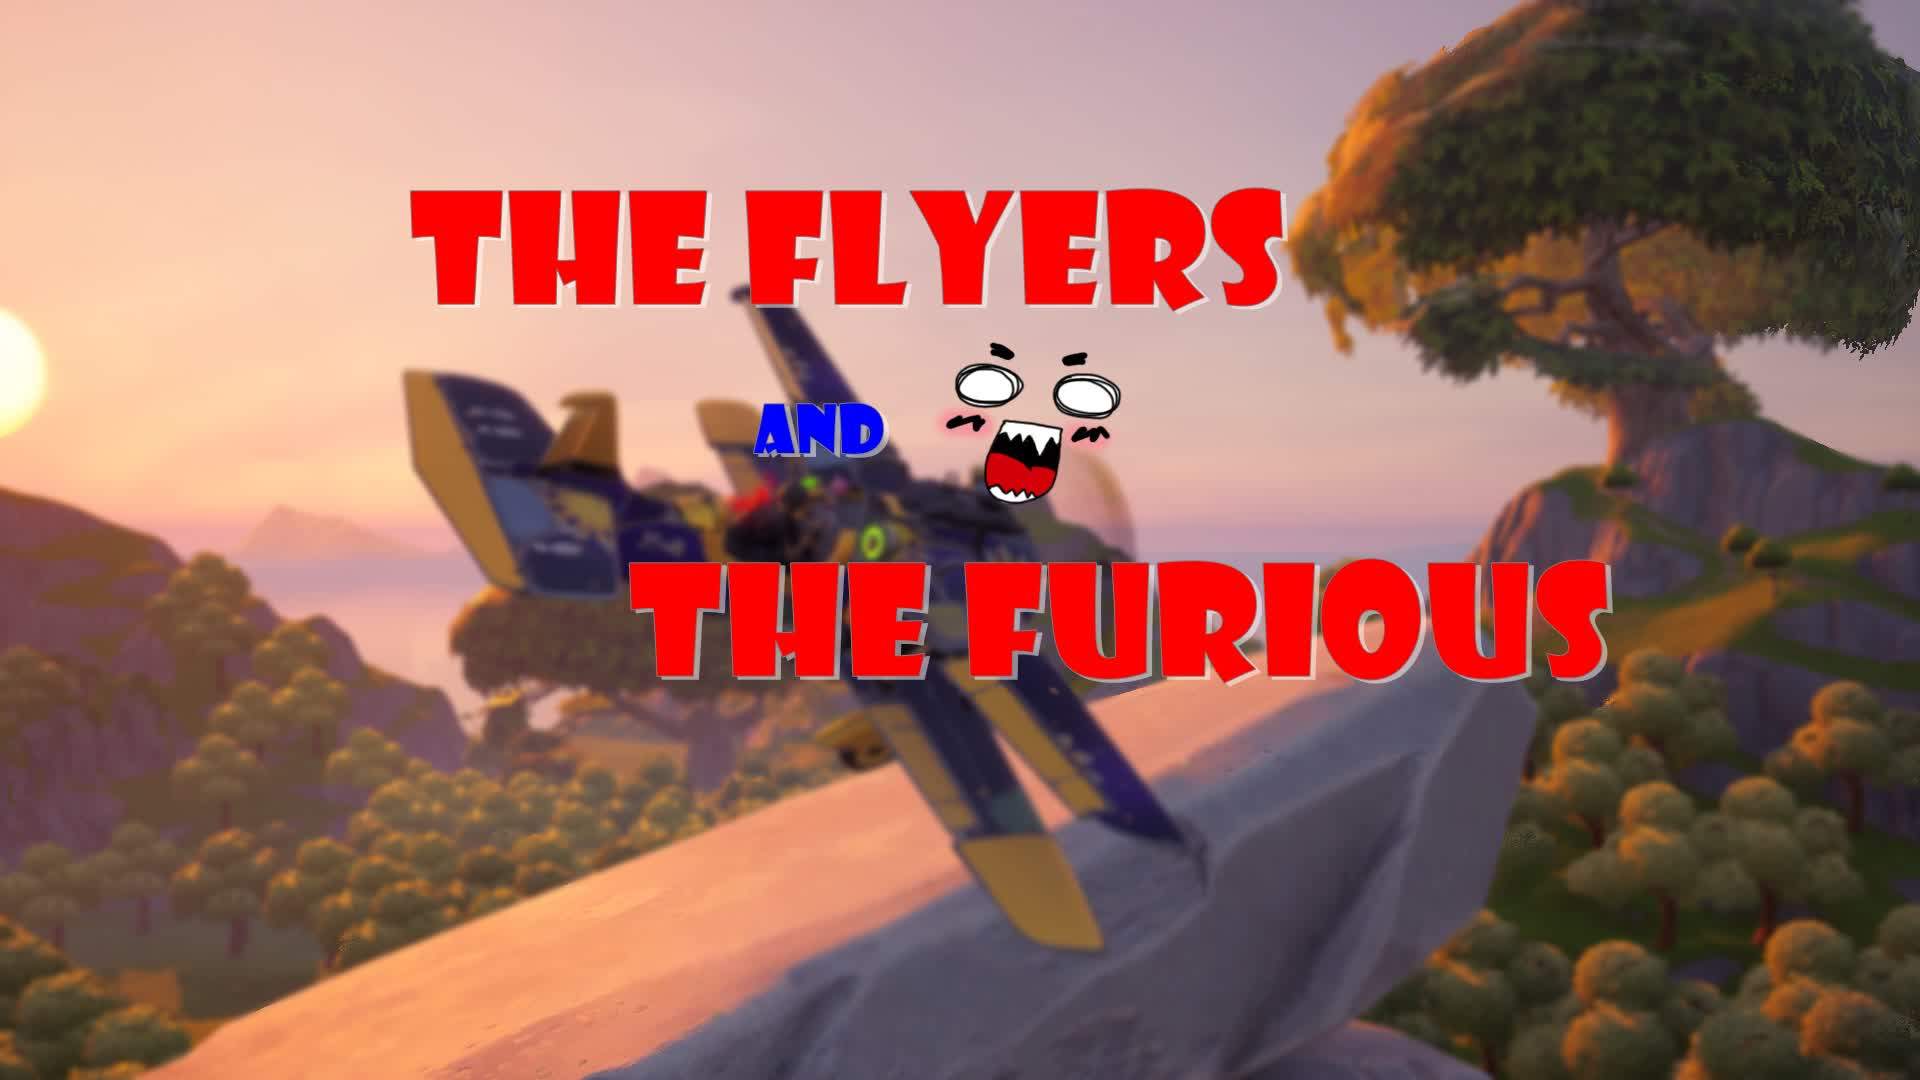 the Flyers and the Furious